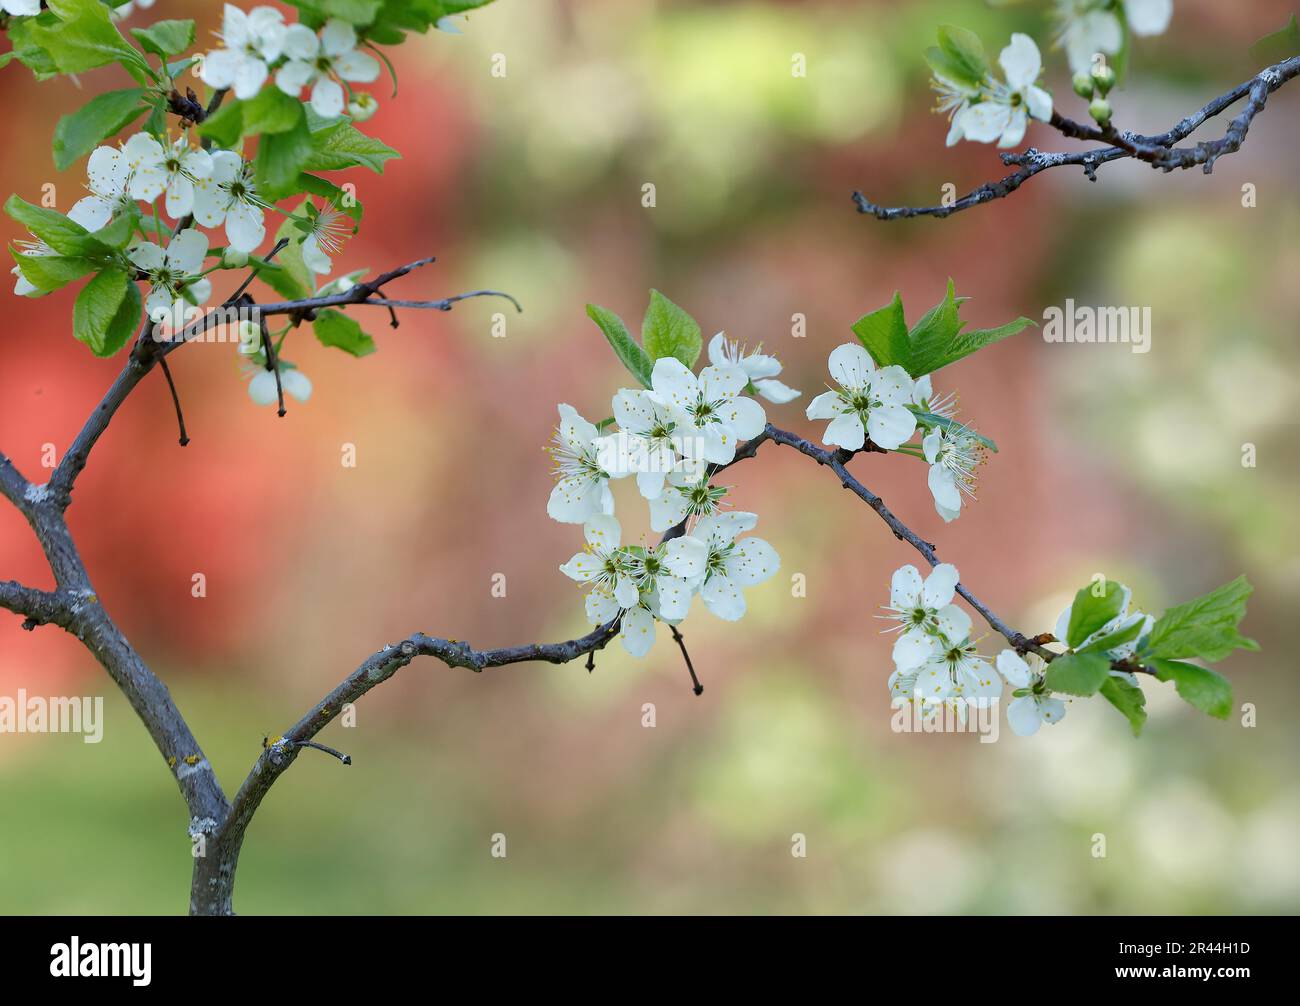 Plum trees branches blooming with white fragile flowers Stock Photo